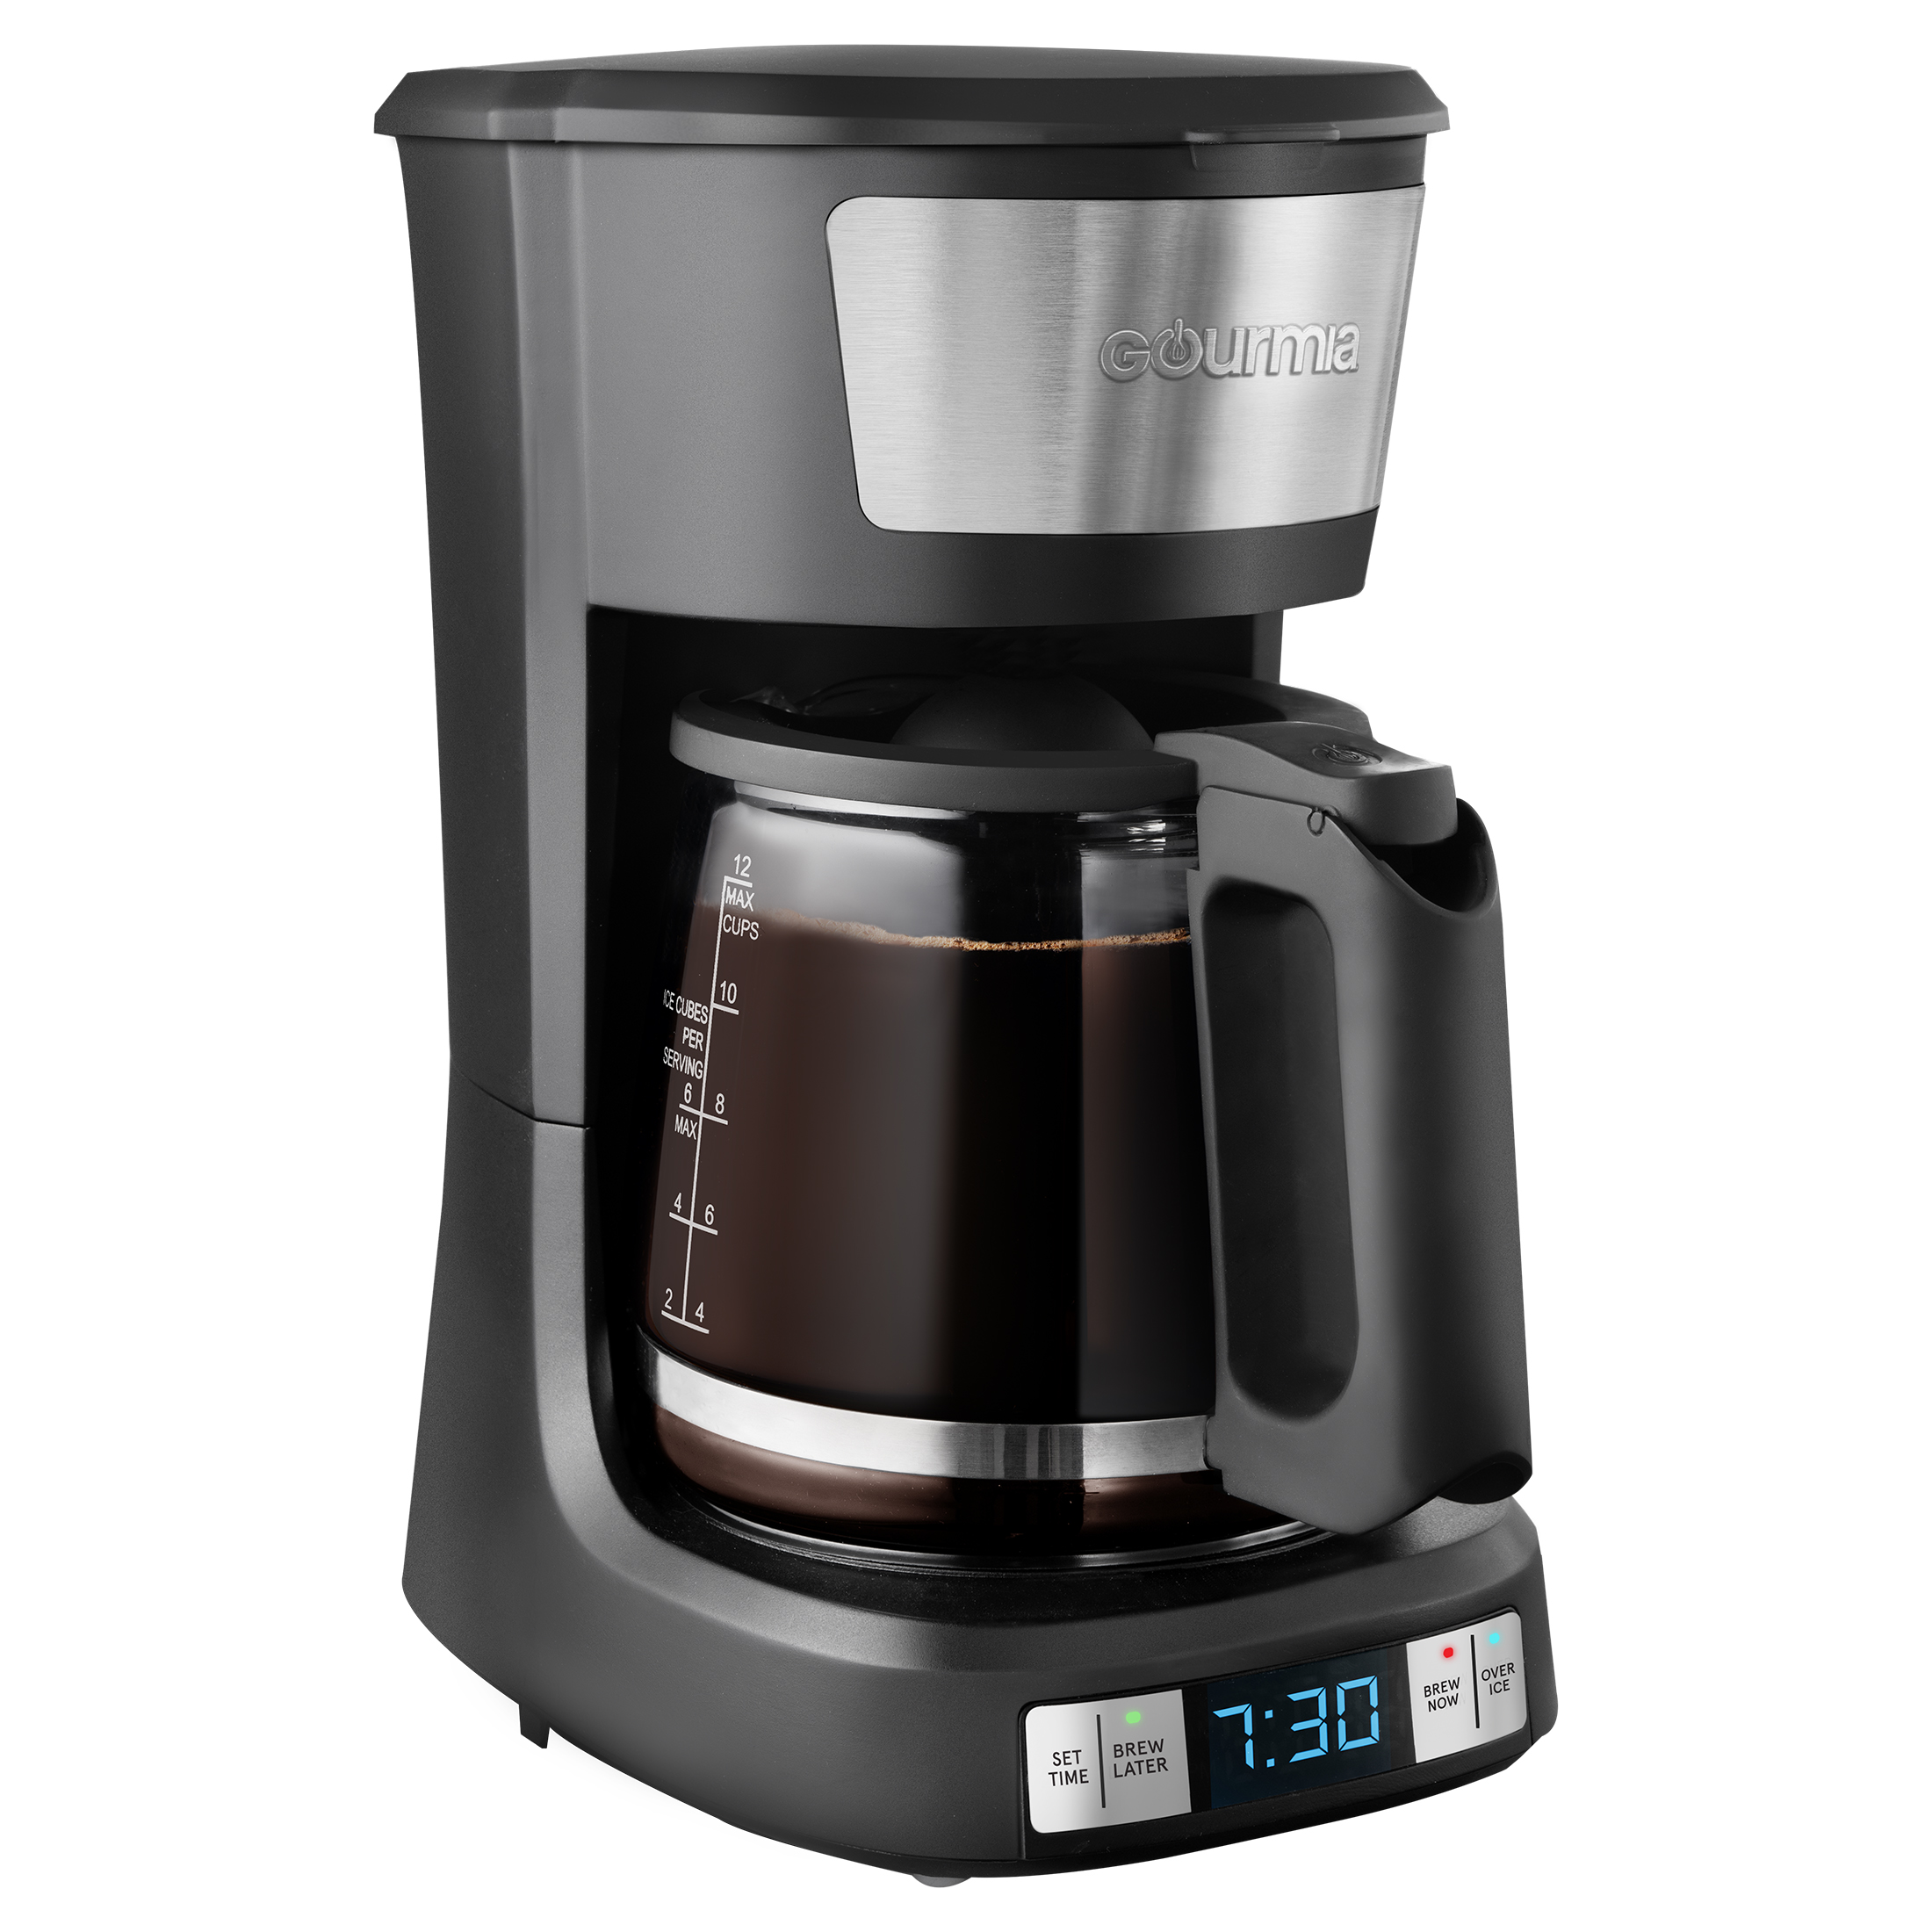 Gourmia 12 Cup Programmable Hot & Iced Coffee Maker with Keep Warm Feature - Black, New - image 4 of 7